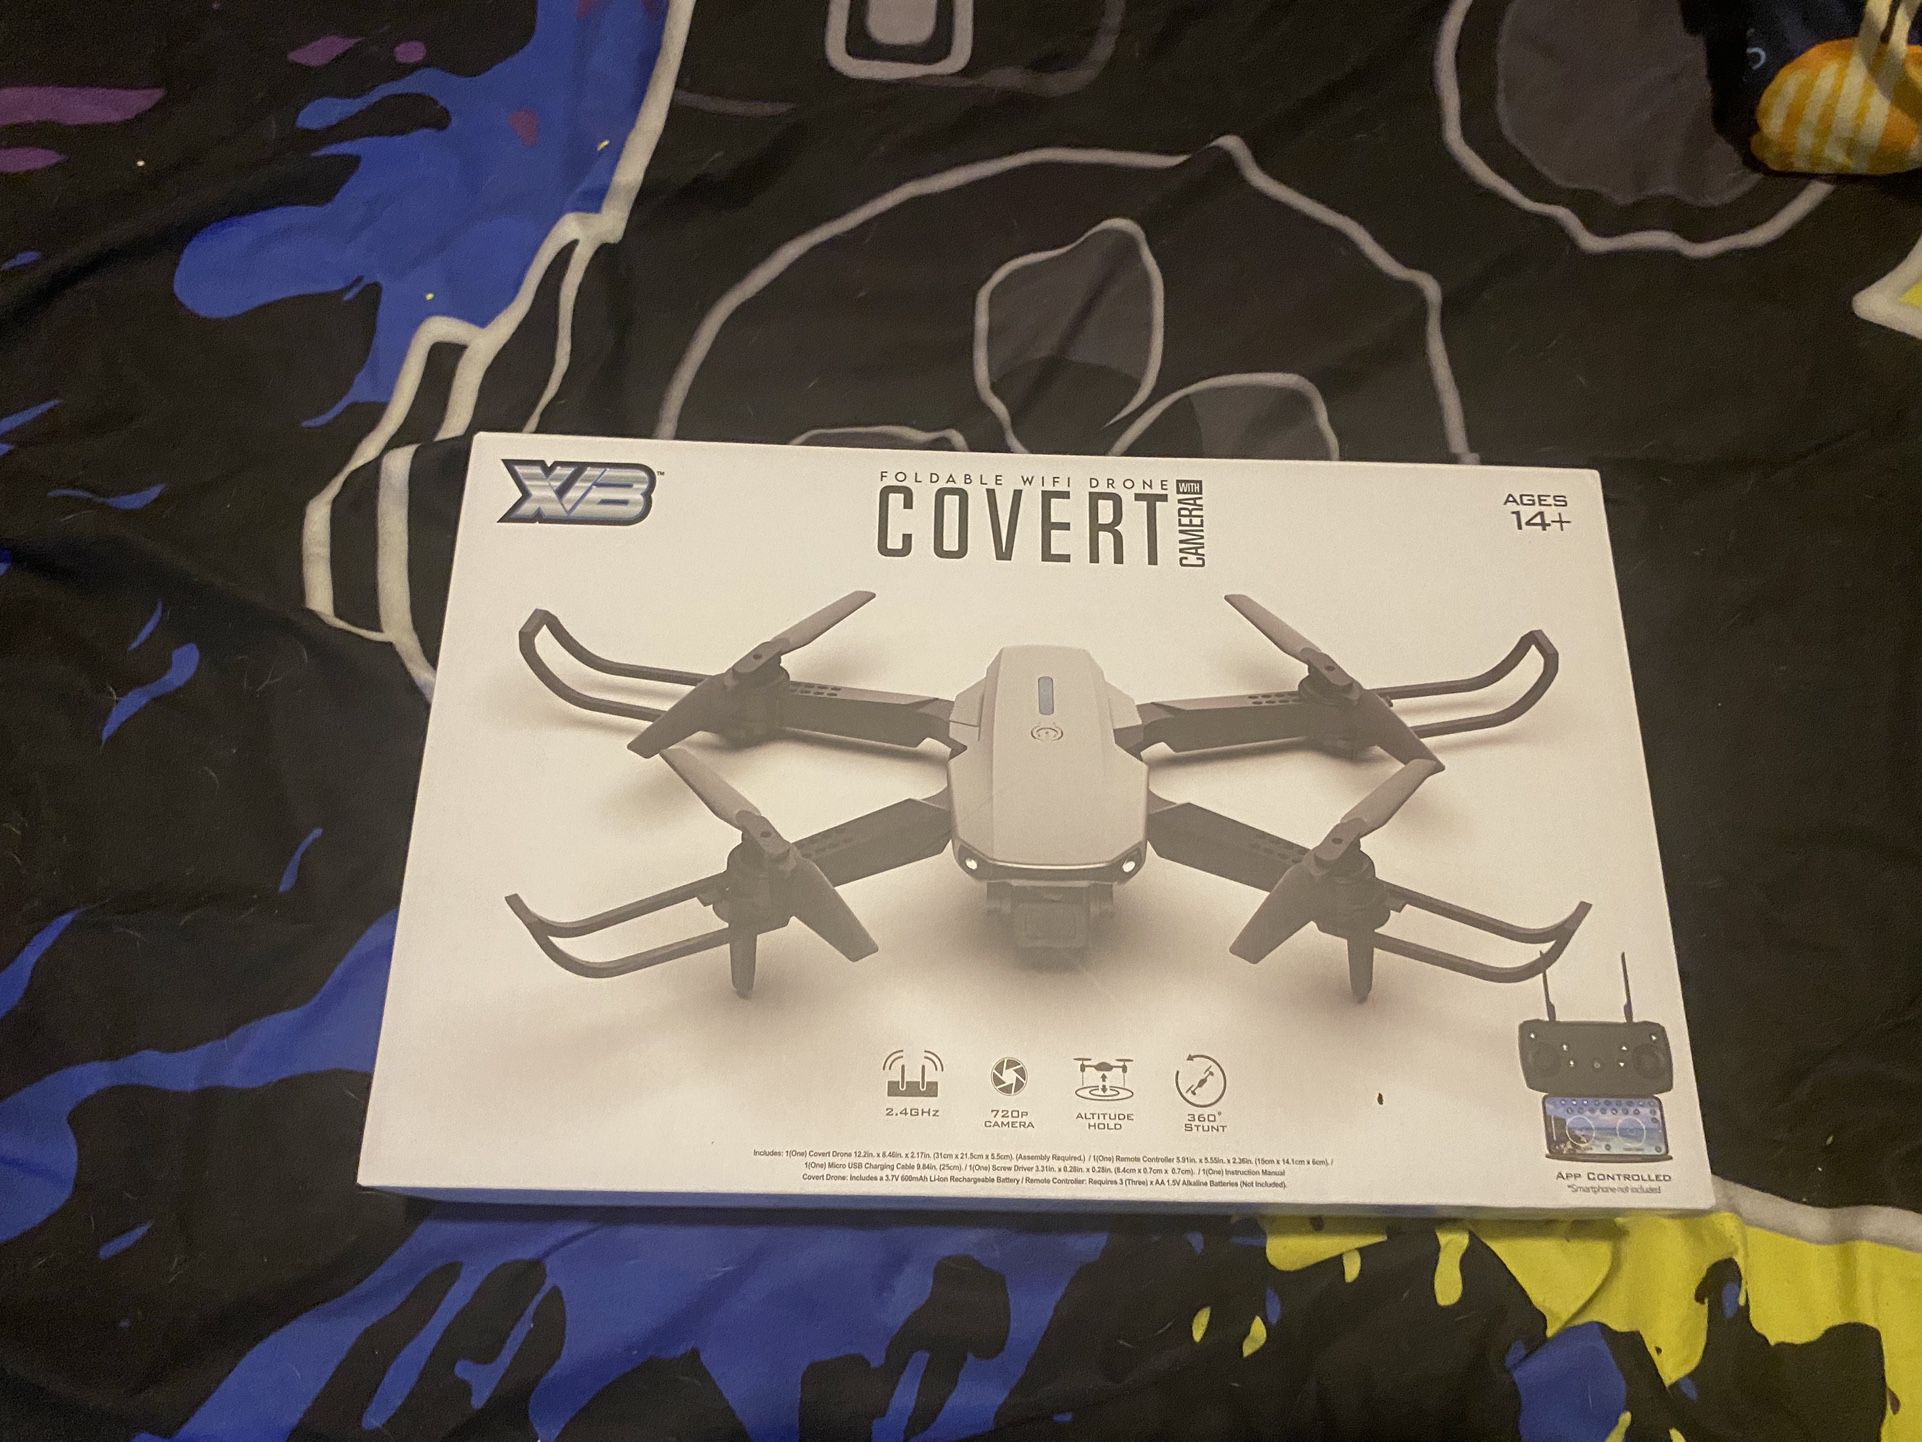 Convert Foldable Wifi Drone With Camera